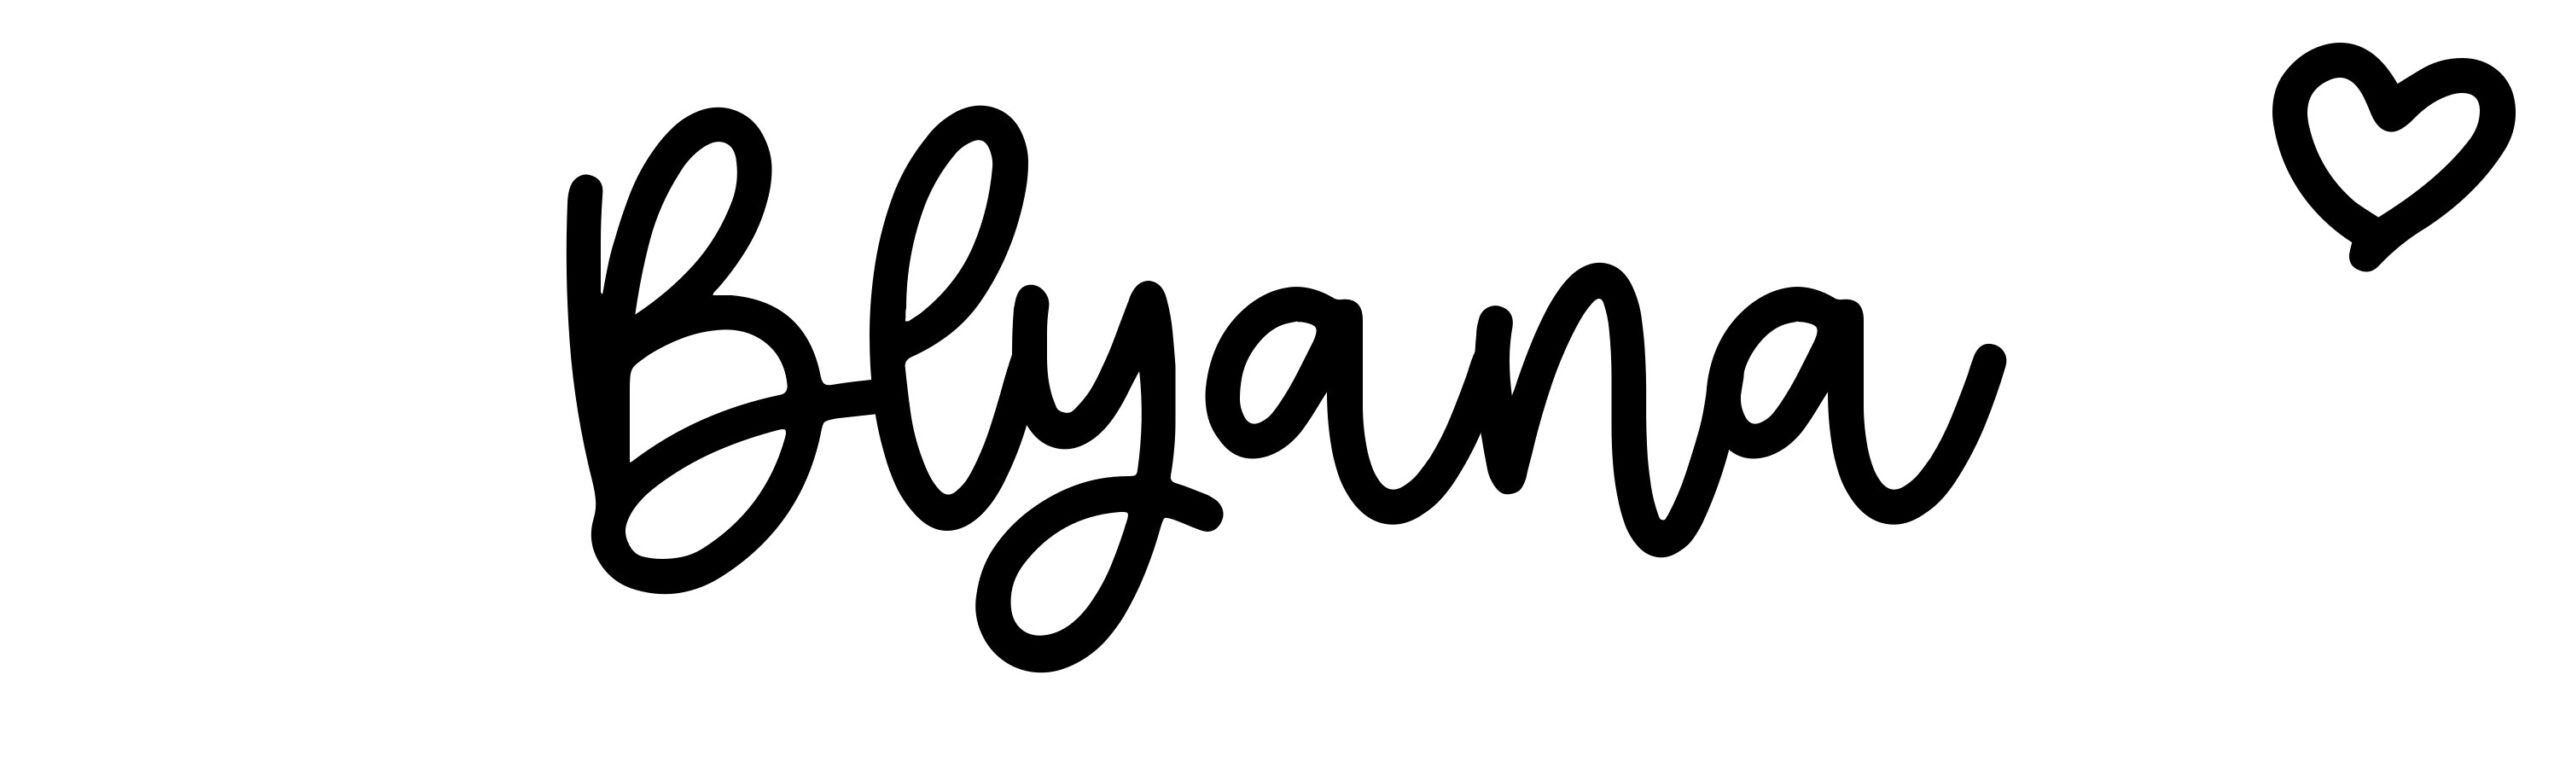 Blyana - Name meaning, origin, variations and more